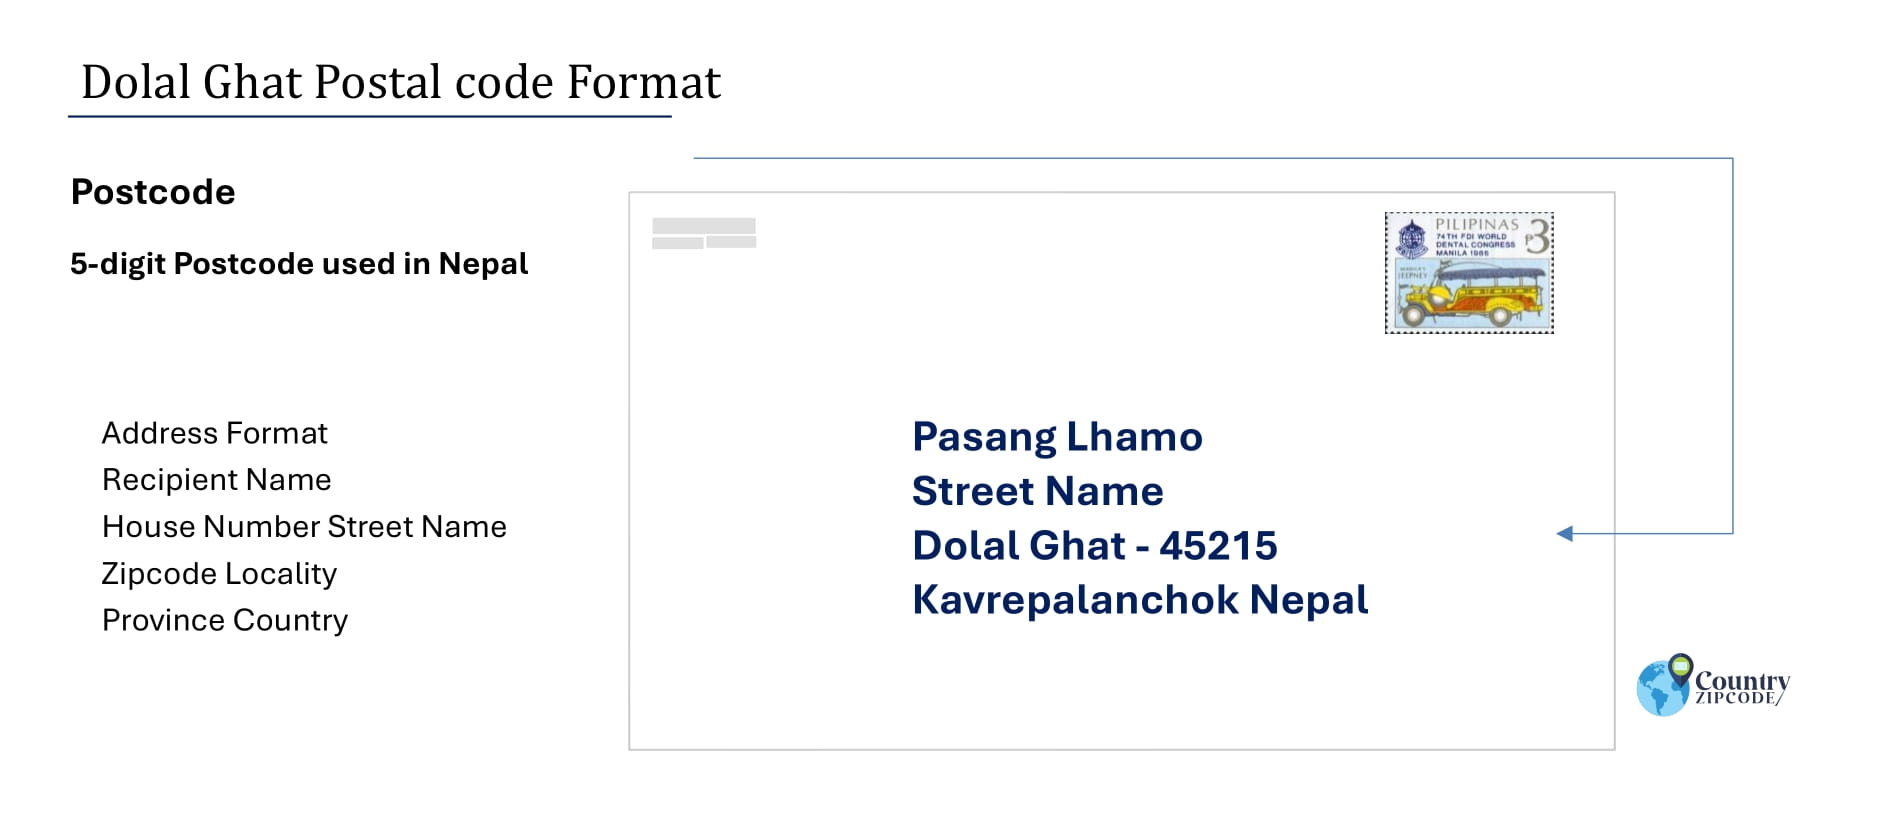 example of Dolal Ghat Nepal Postal code and address format